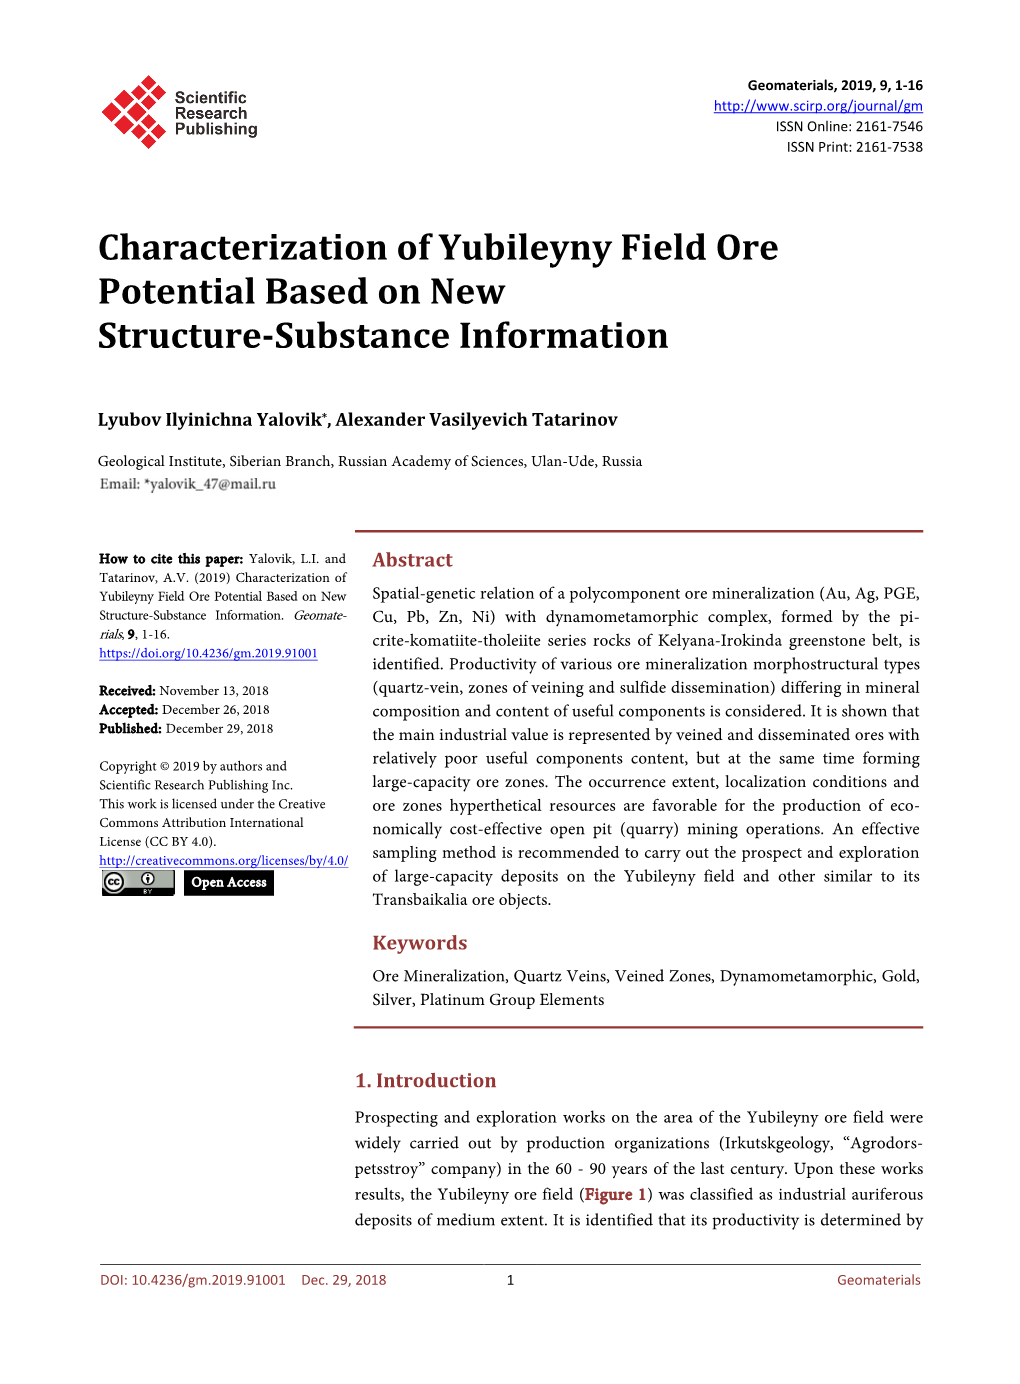 Characterization of Yubileyny Field Ore Potential Based on New Structure-Substance Information